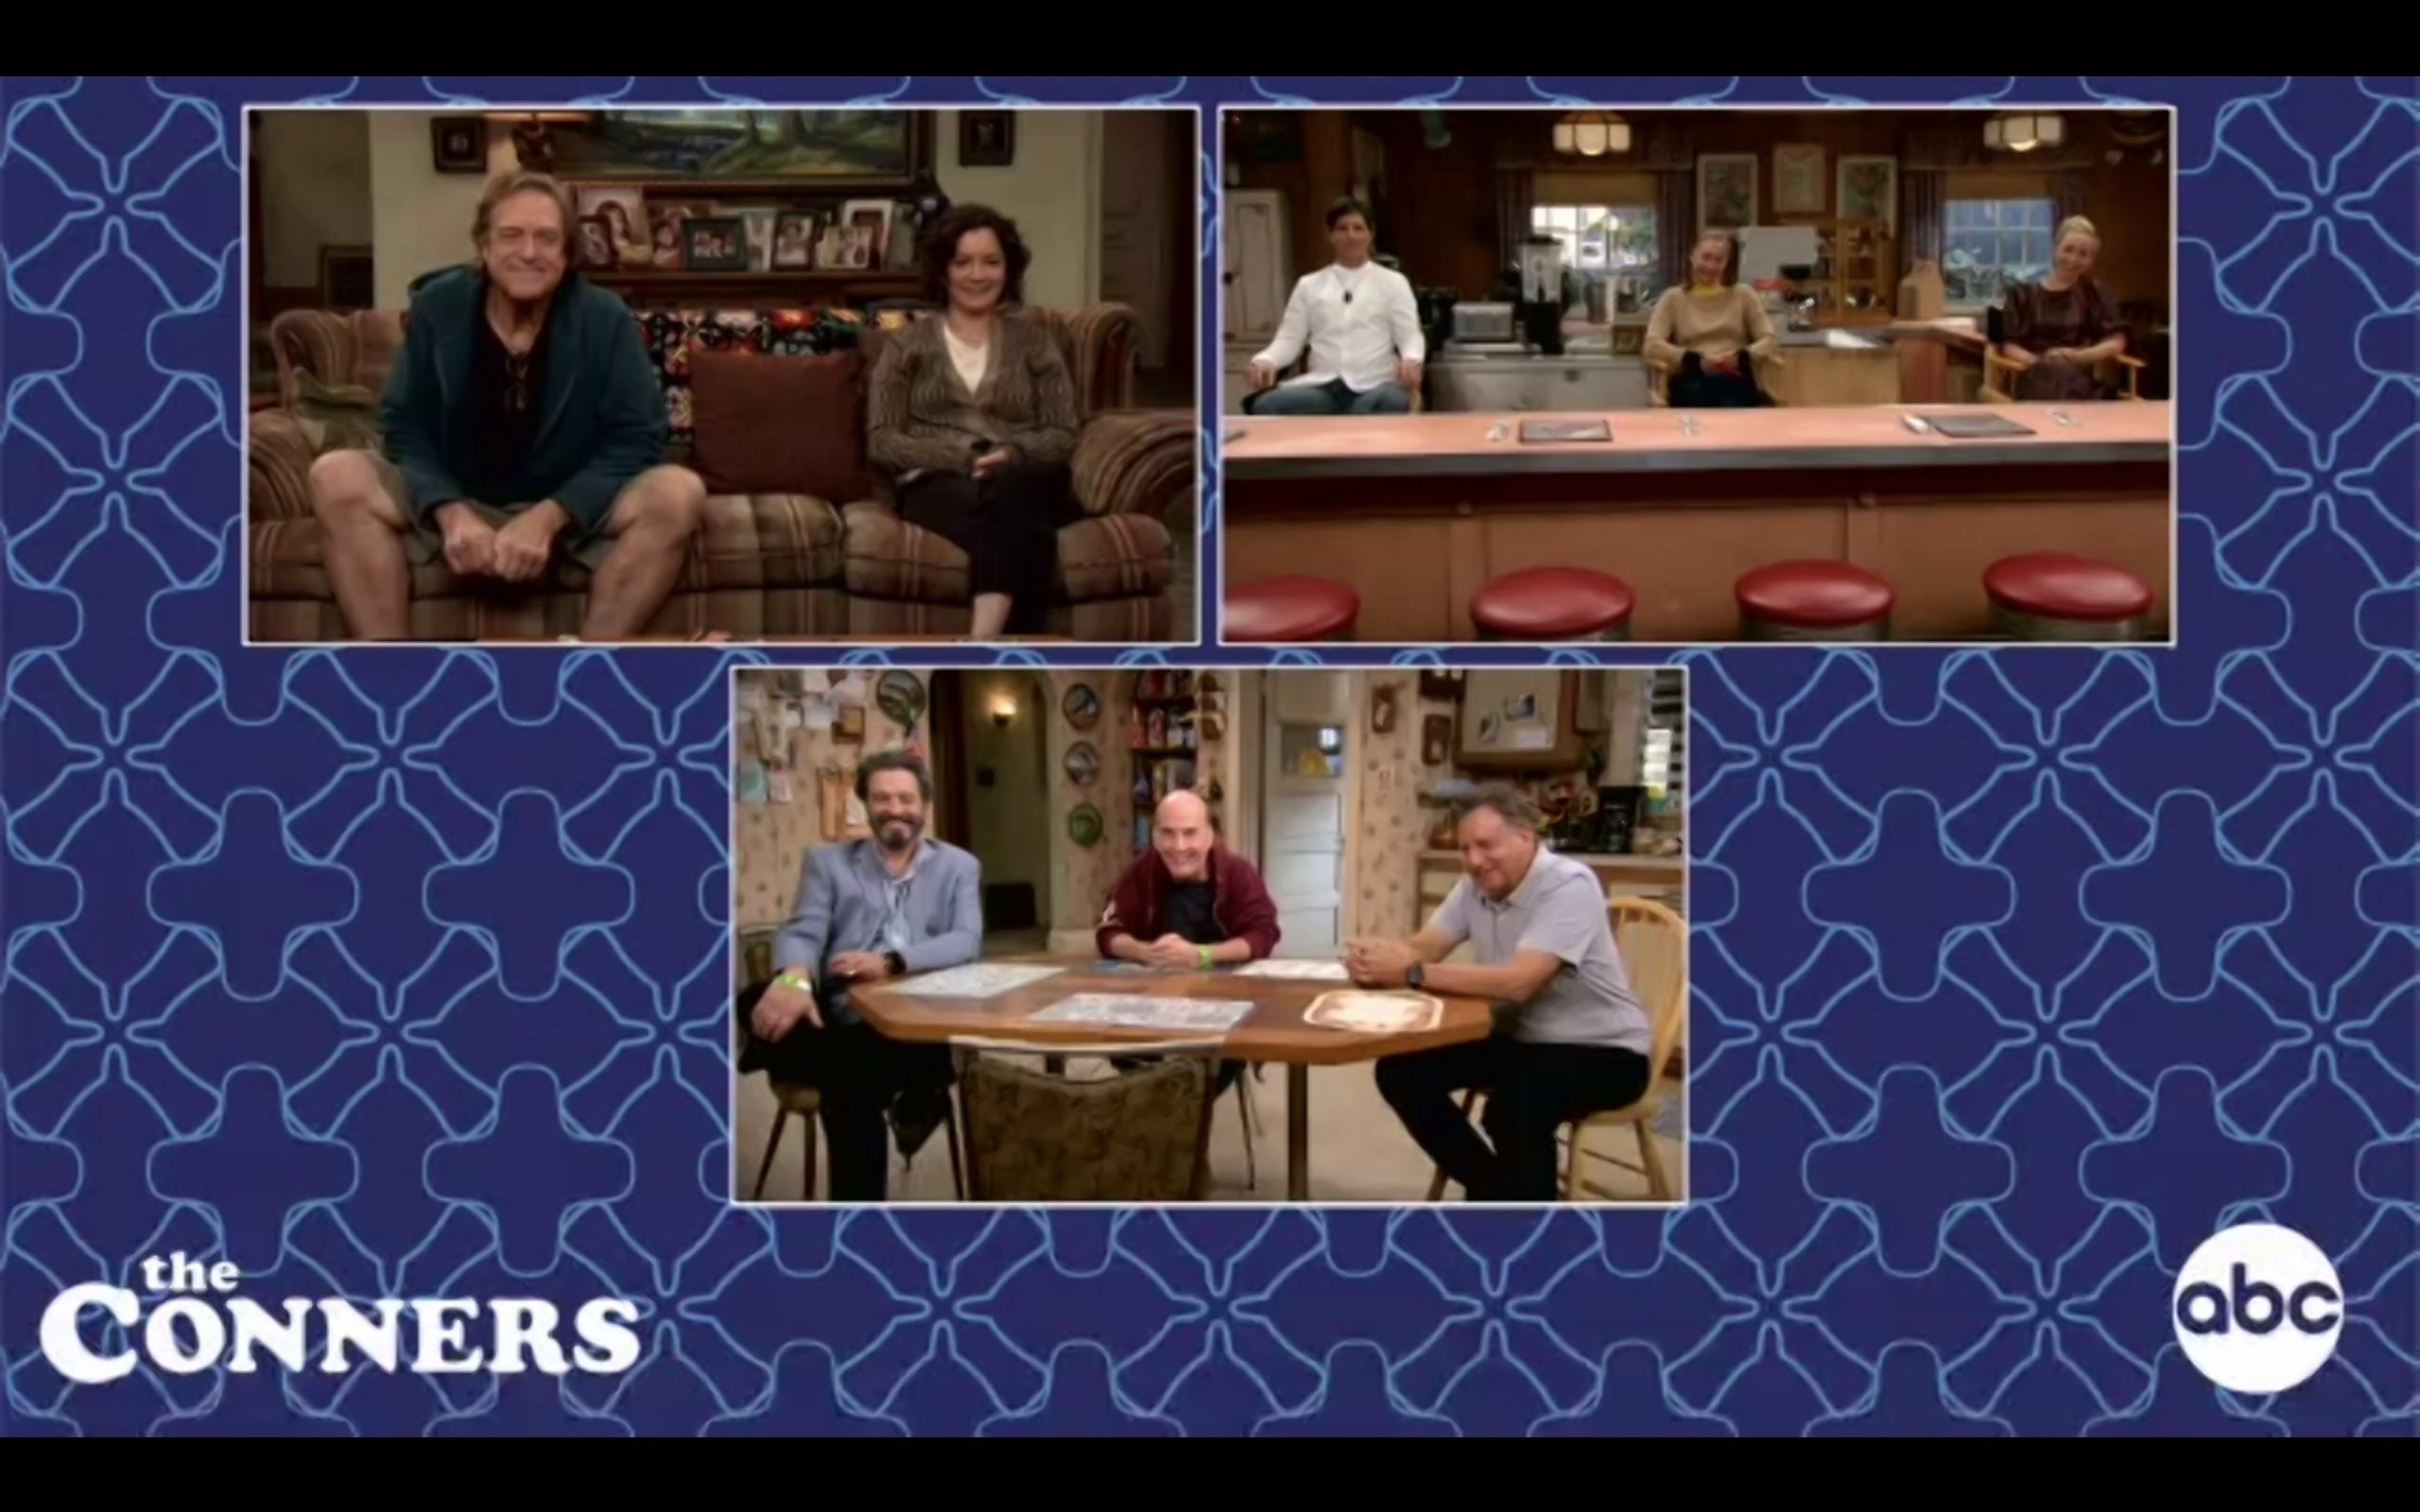 The Conners: The Cast and Producers Talk Production During Pandemic